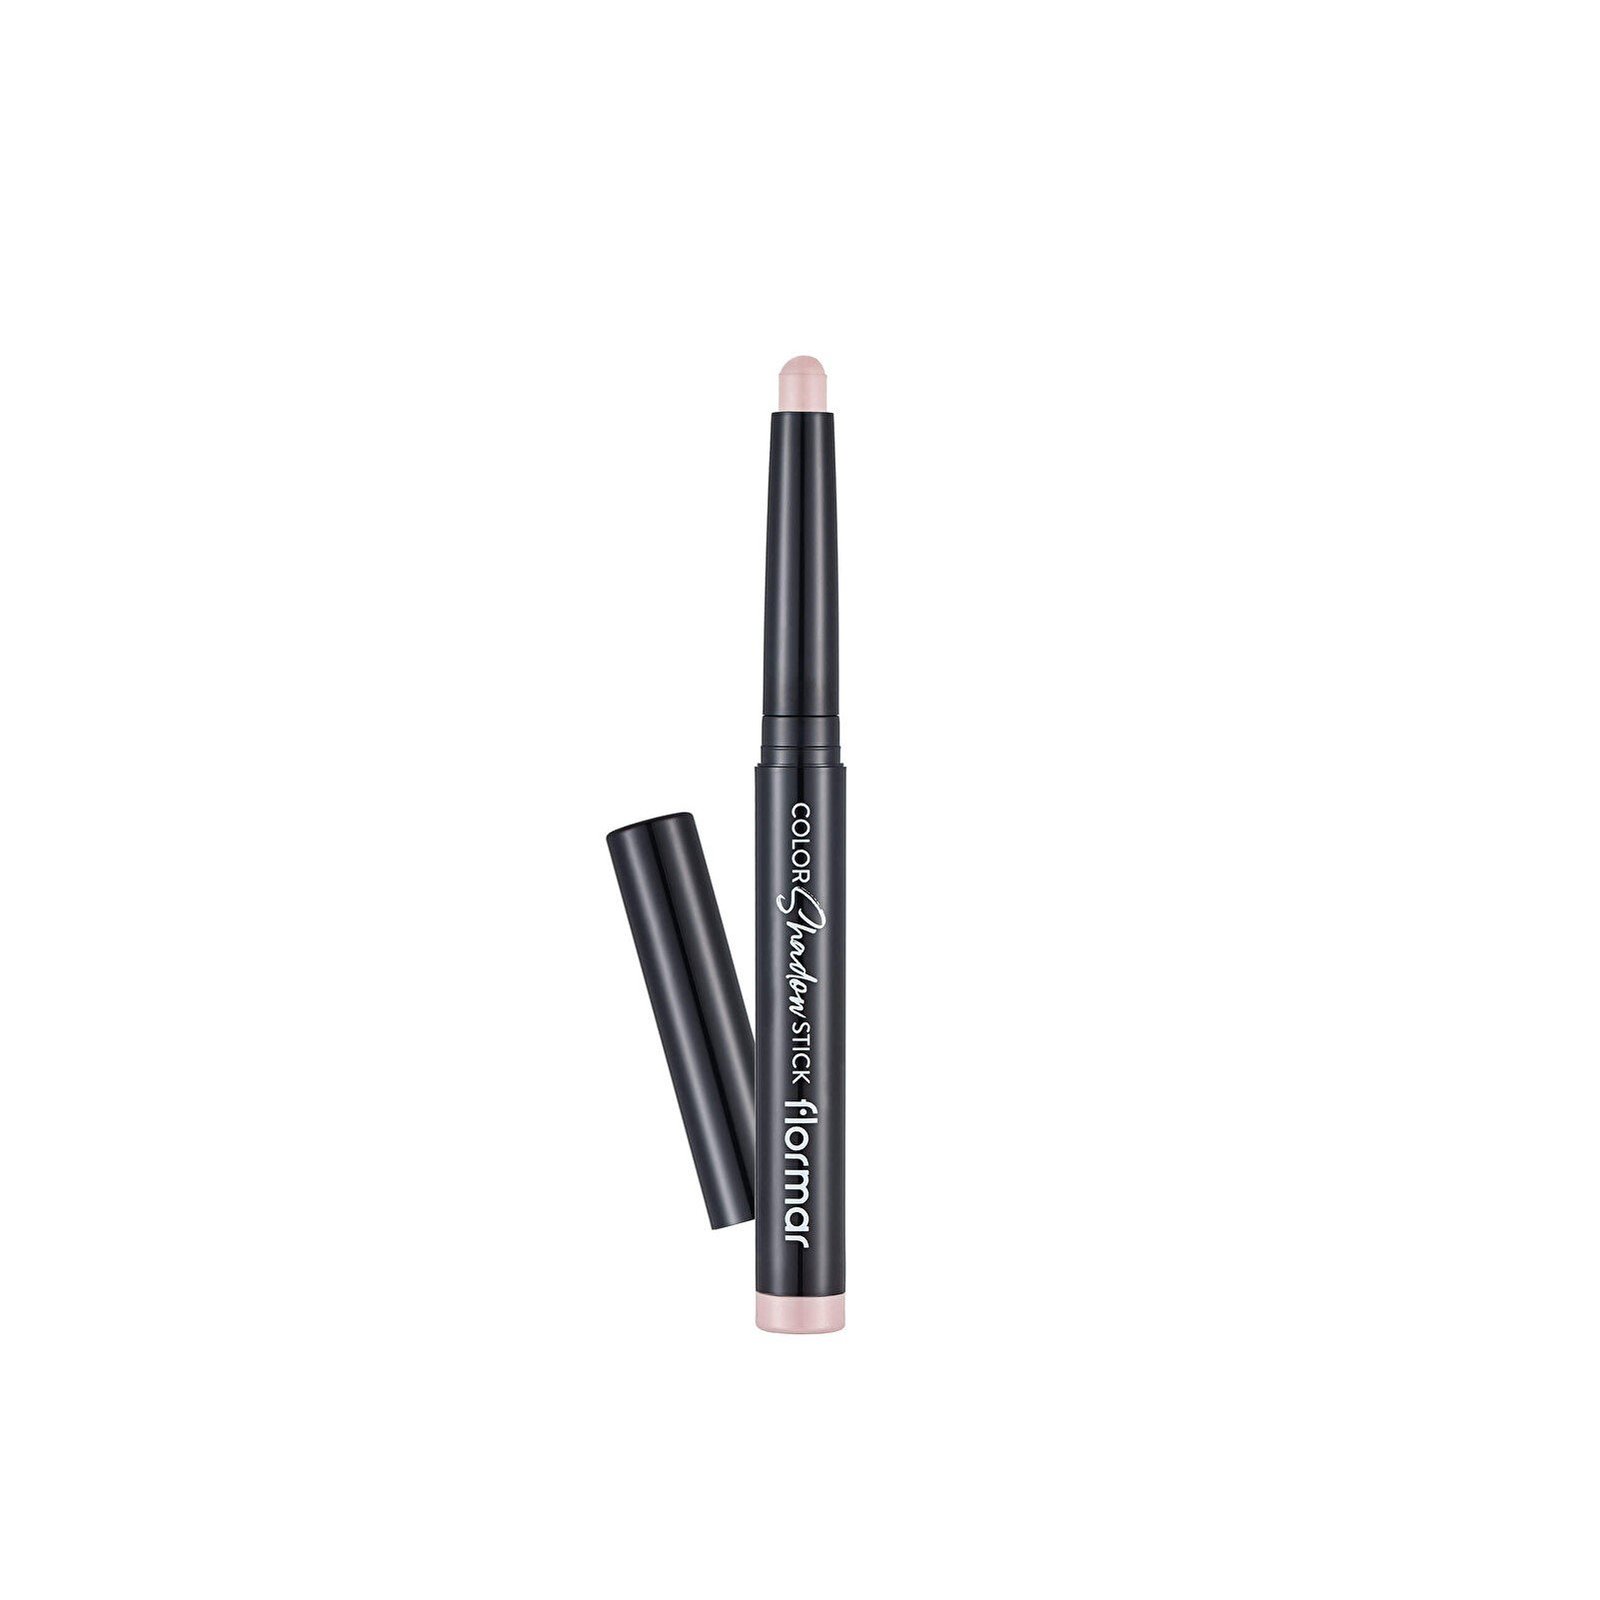 Flormar Color Shadow Stick 005 Icy Pink 1.6g